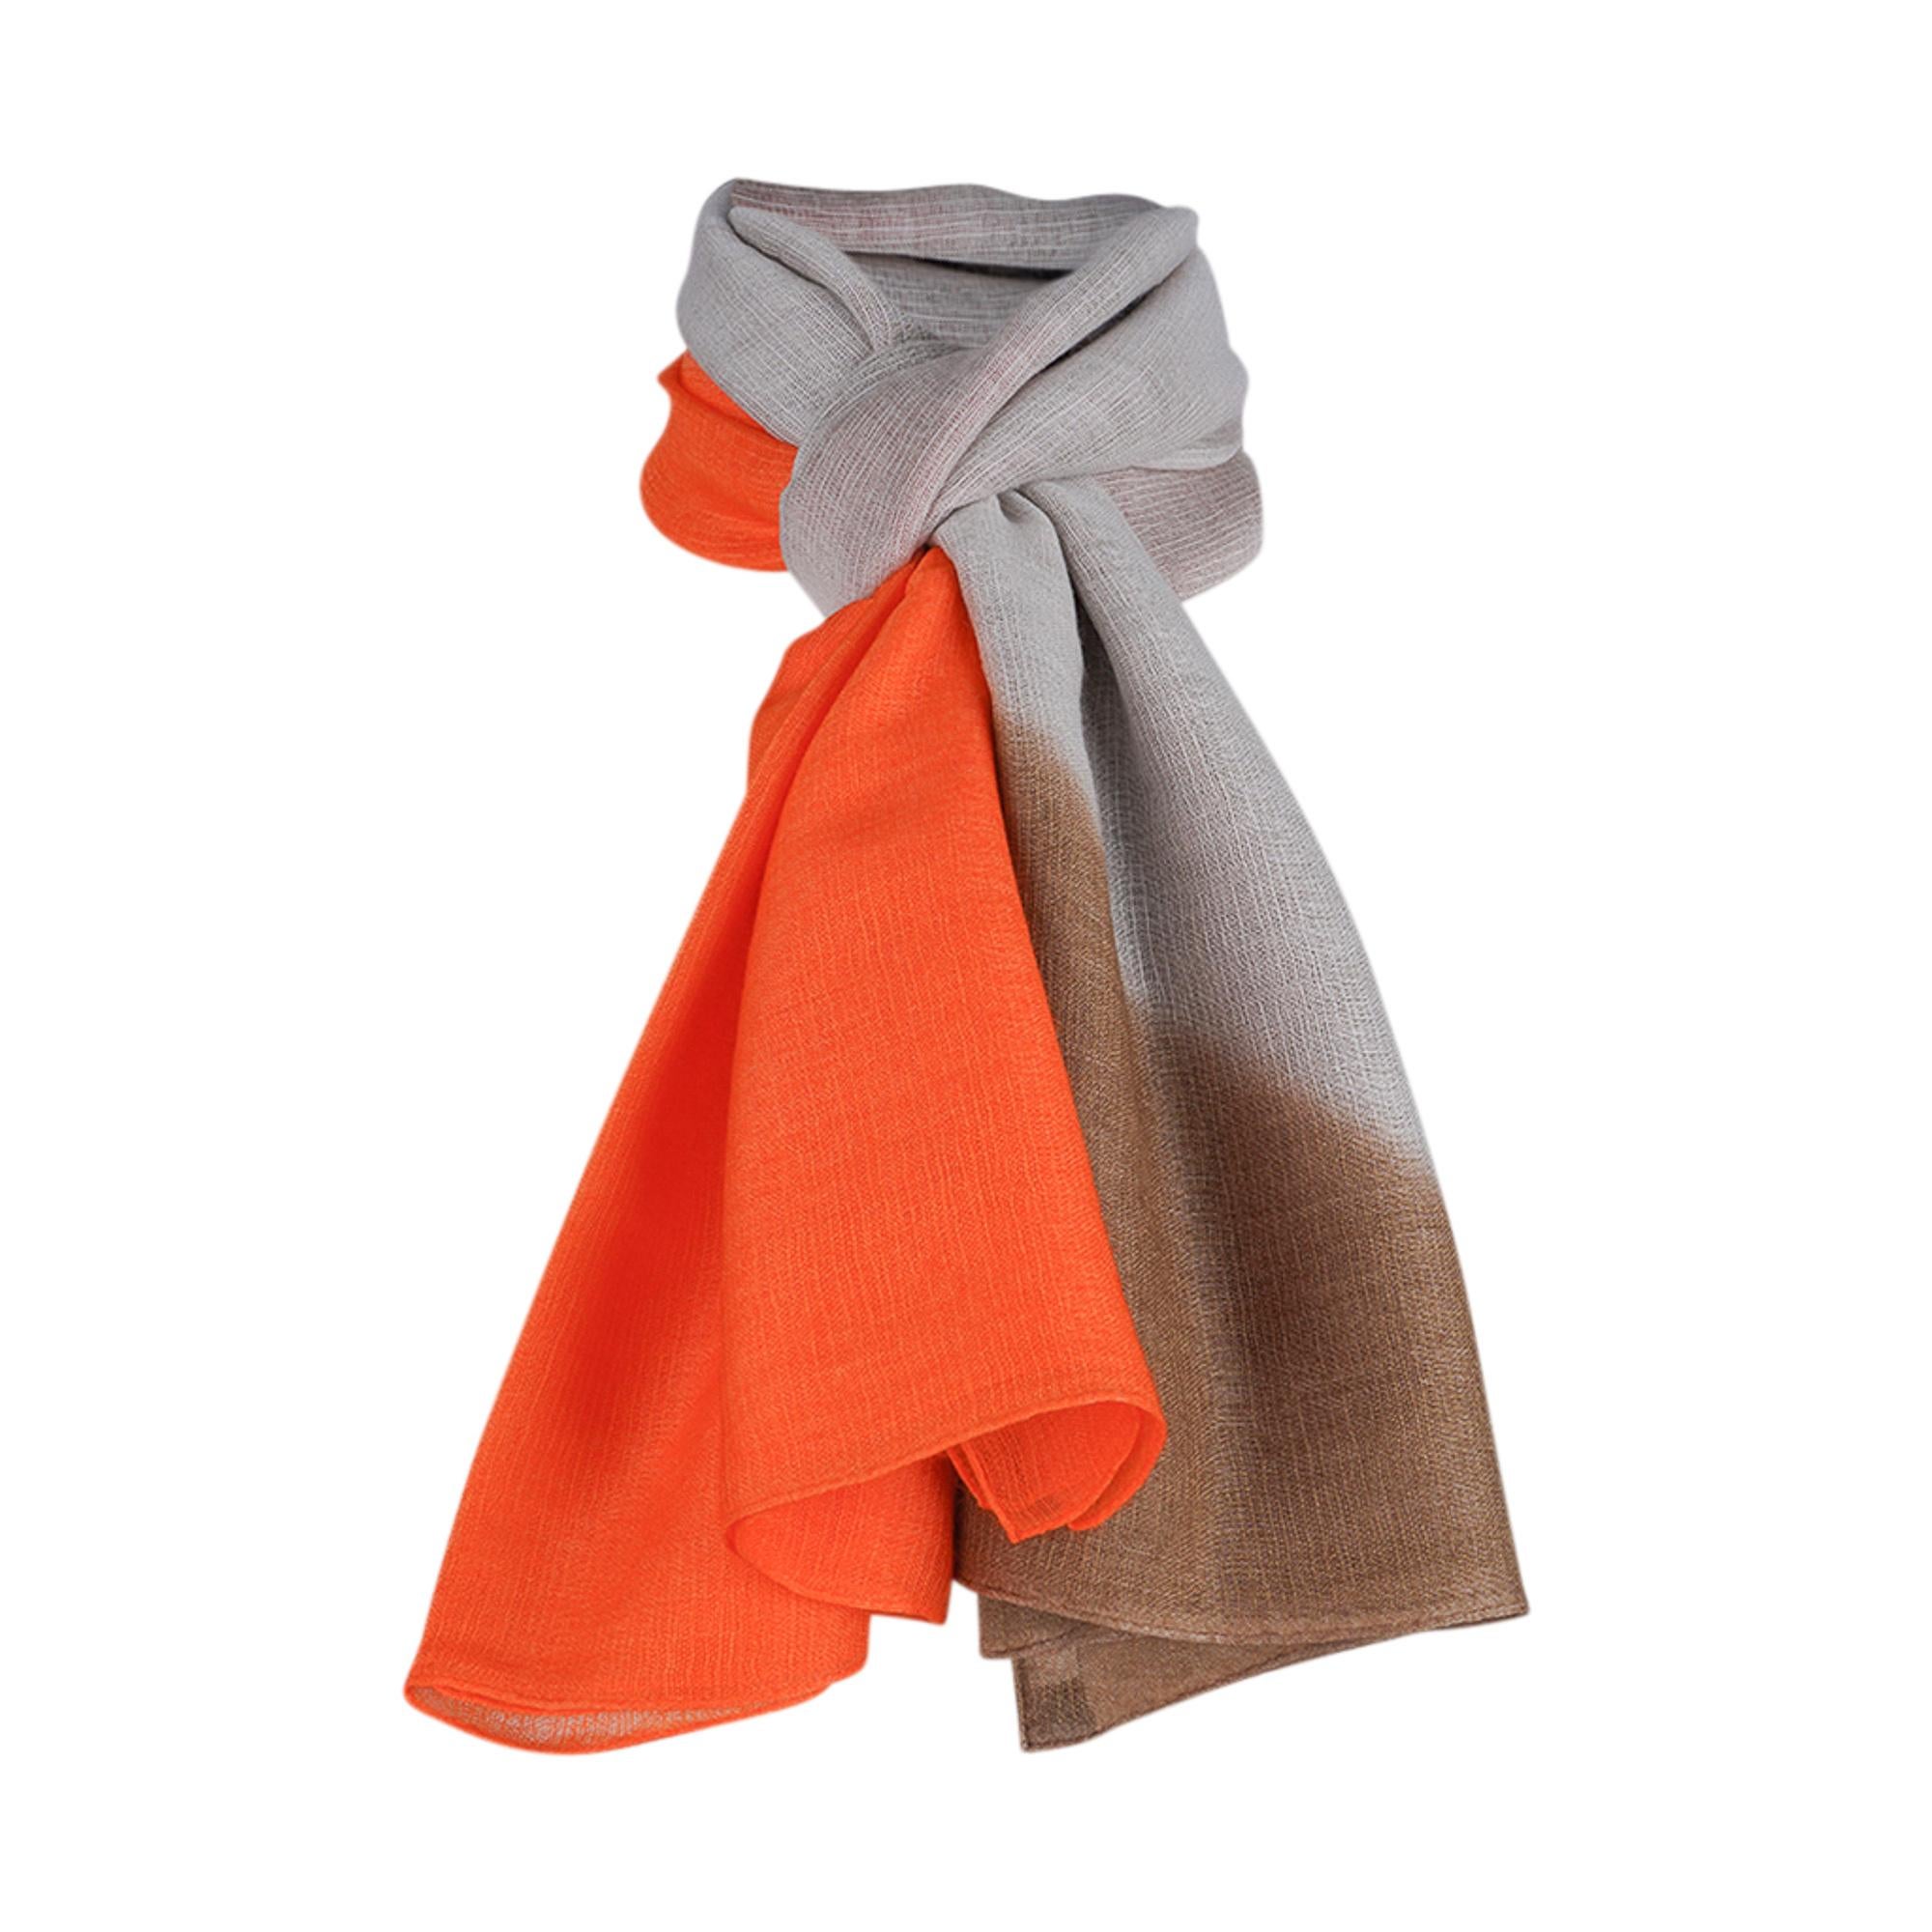 Mightychic offers a very rare Hermes Maxi Plume Cashmere and Silk wrap / shawl.
Featured in beautiful ombre moving from Orange to Beige and Bronze.
Light as a feather with subtle H Hermes Paris on one corner.
This exquisite light shawl is so fine